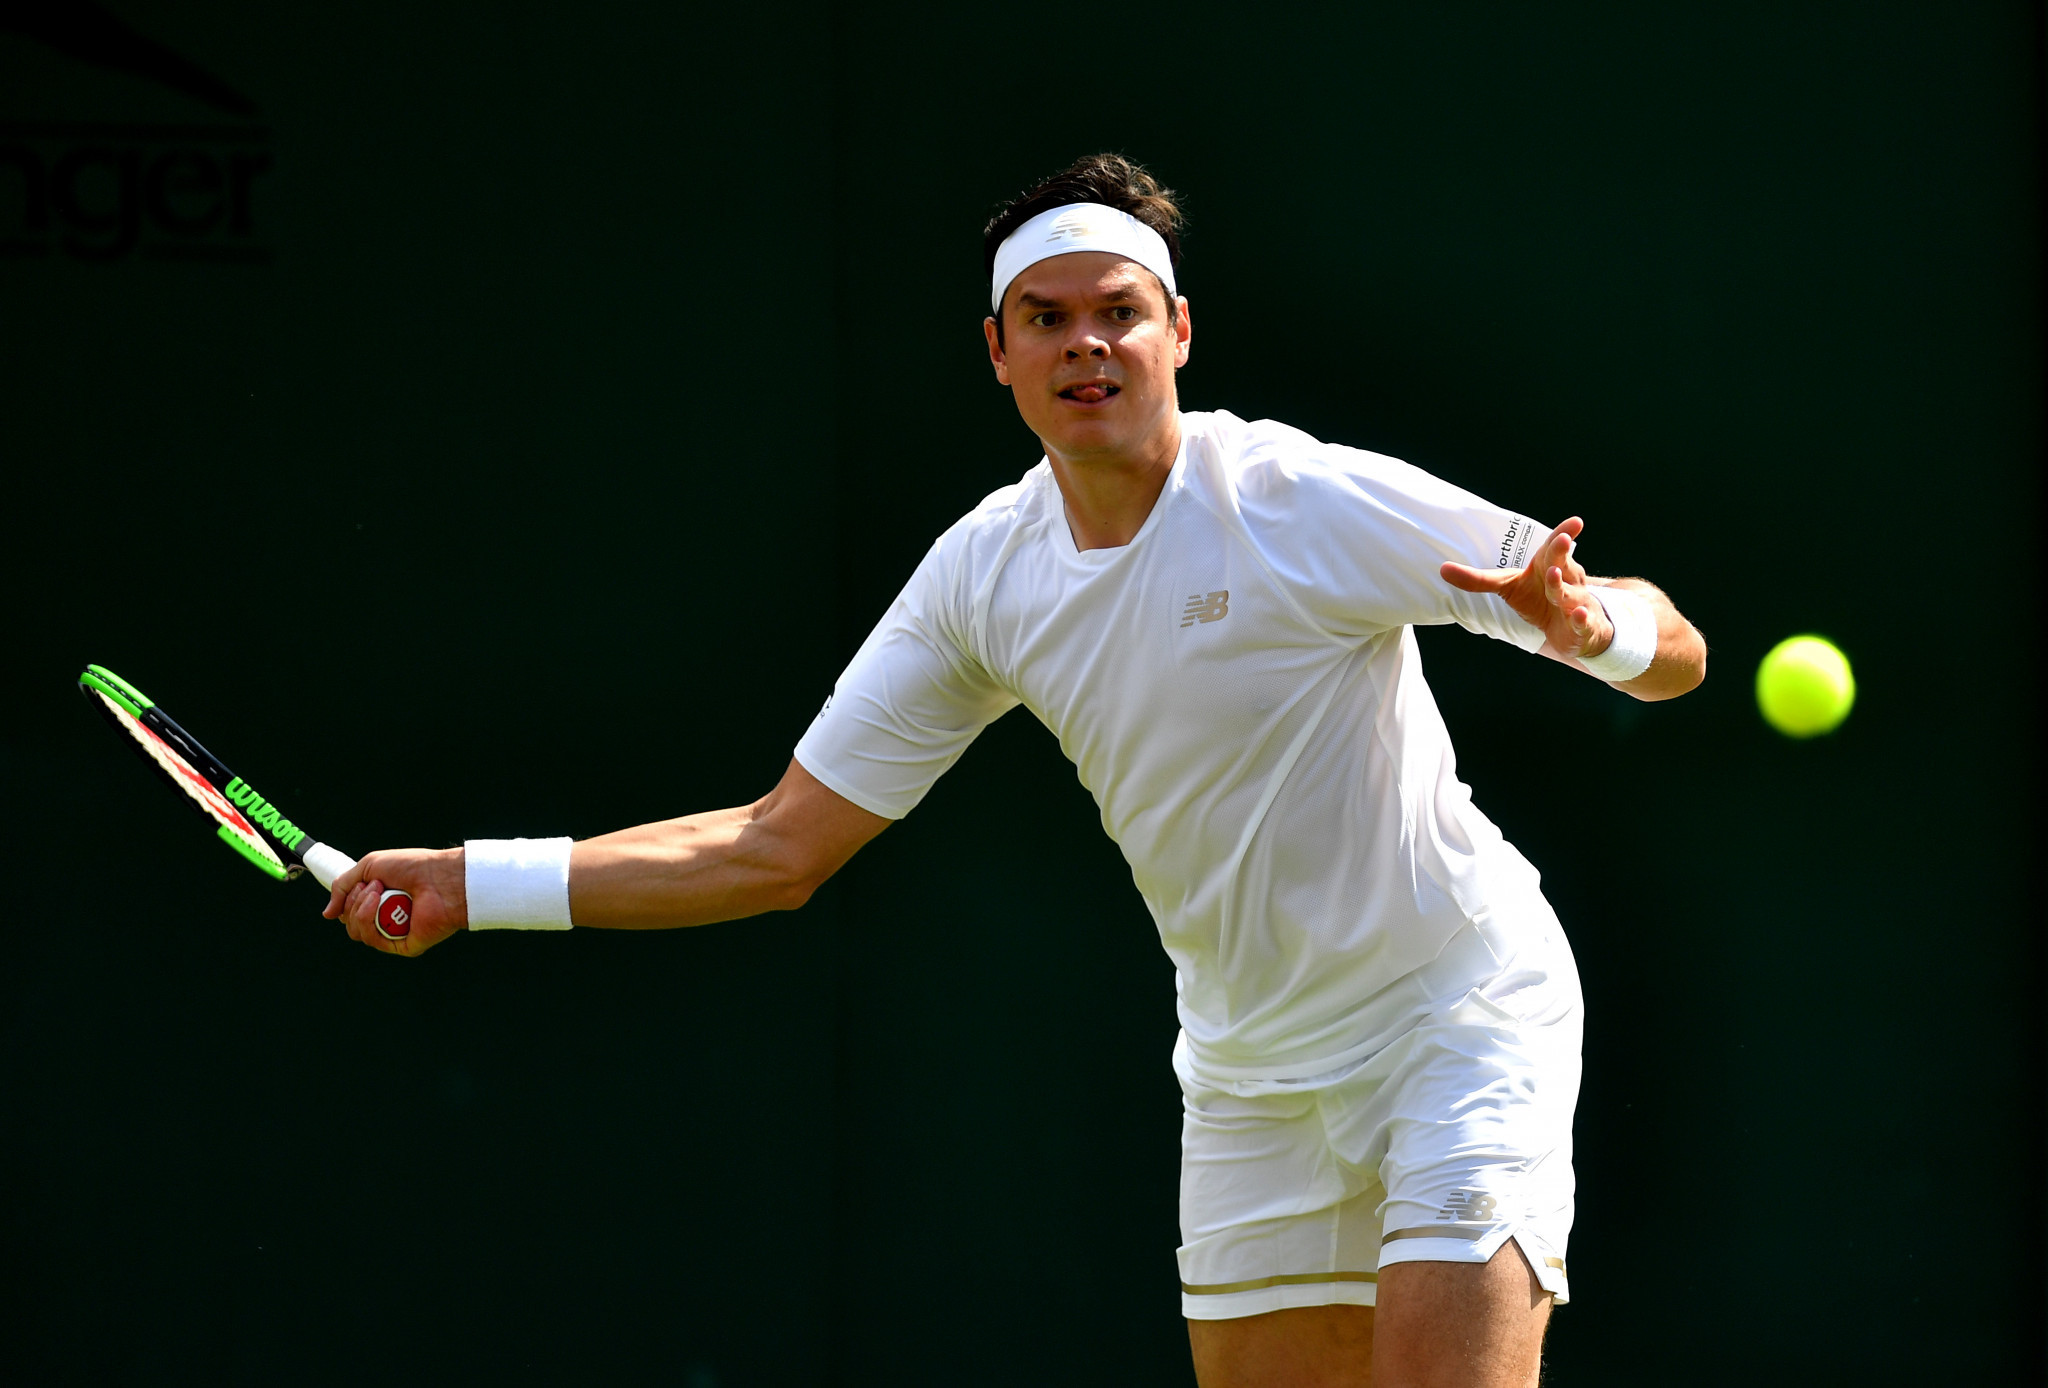 Canadian Raonic took a 7-6, 7-5, 7-6 victory ©Getty Images